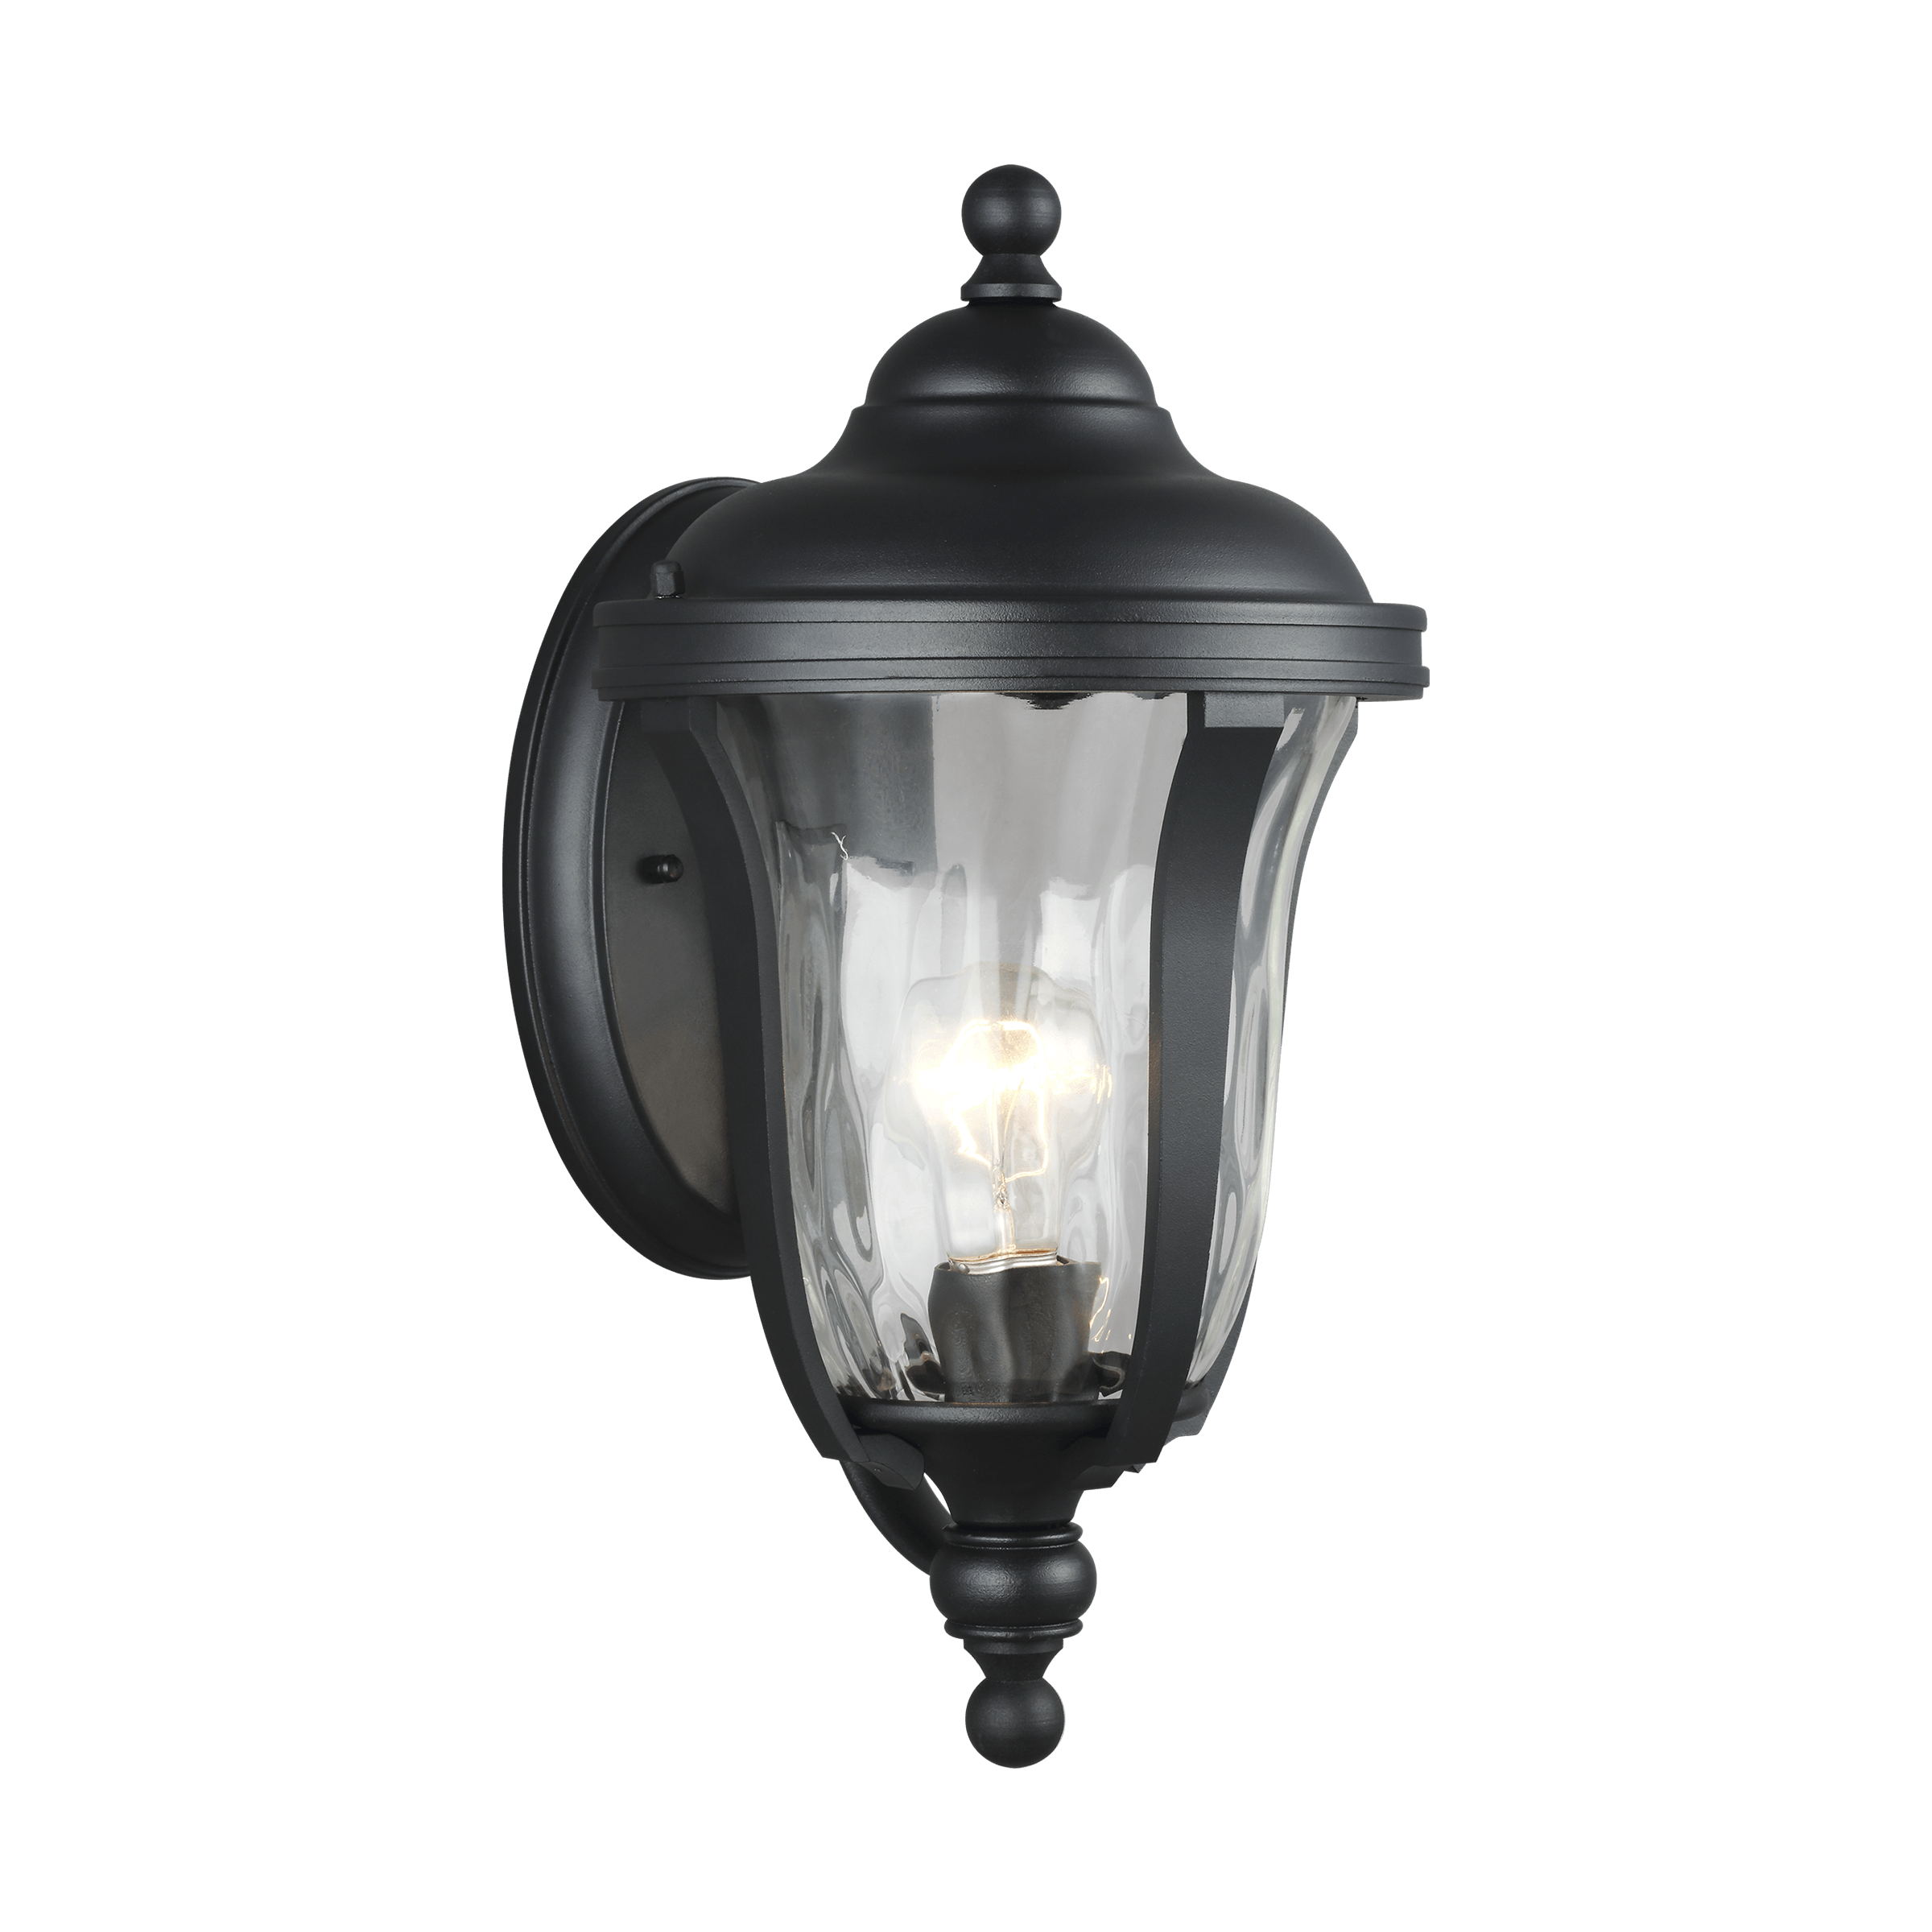 Perrywood Small One Light Outdoor Wall Lantern - Black Outdoor Sea Gull Lighting 